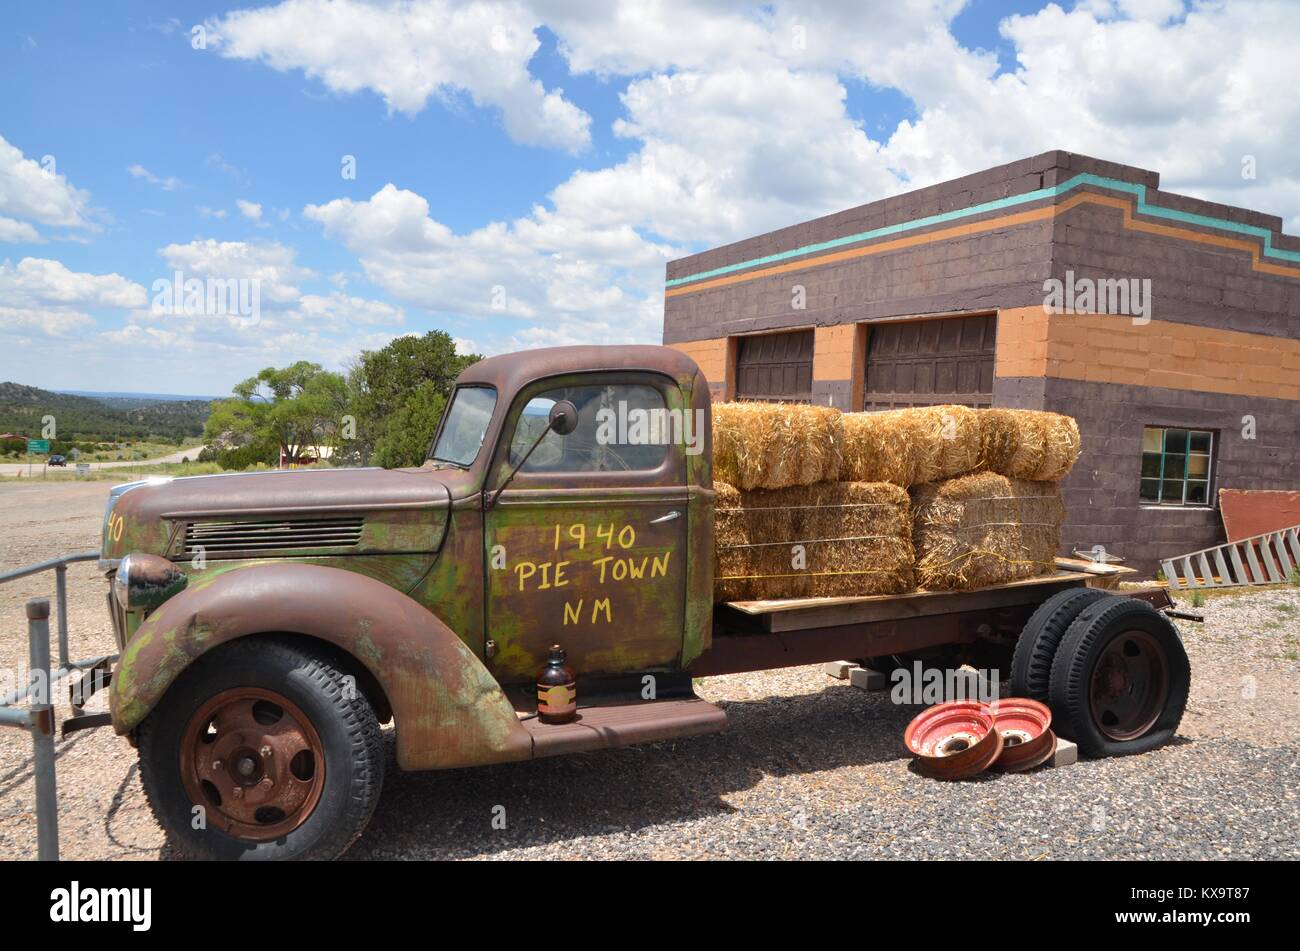 vintage truck outside the gathering place pietown new mexico USA Stock Photo